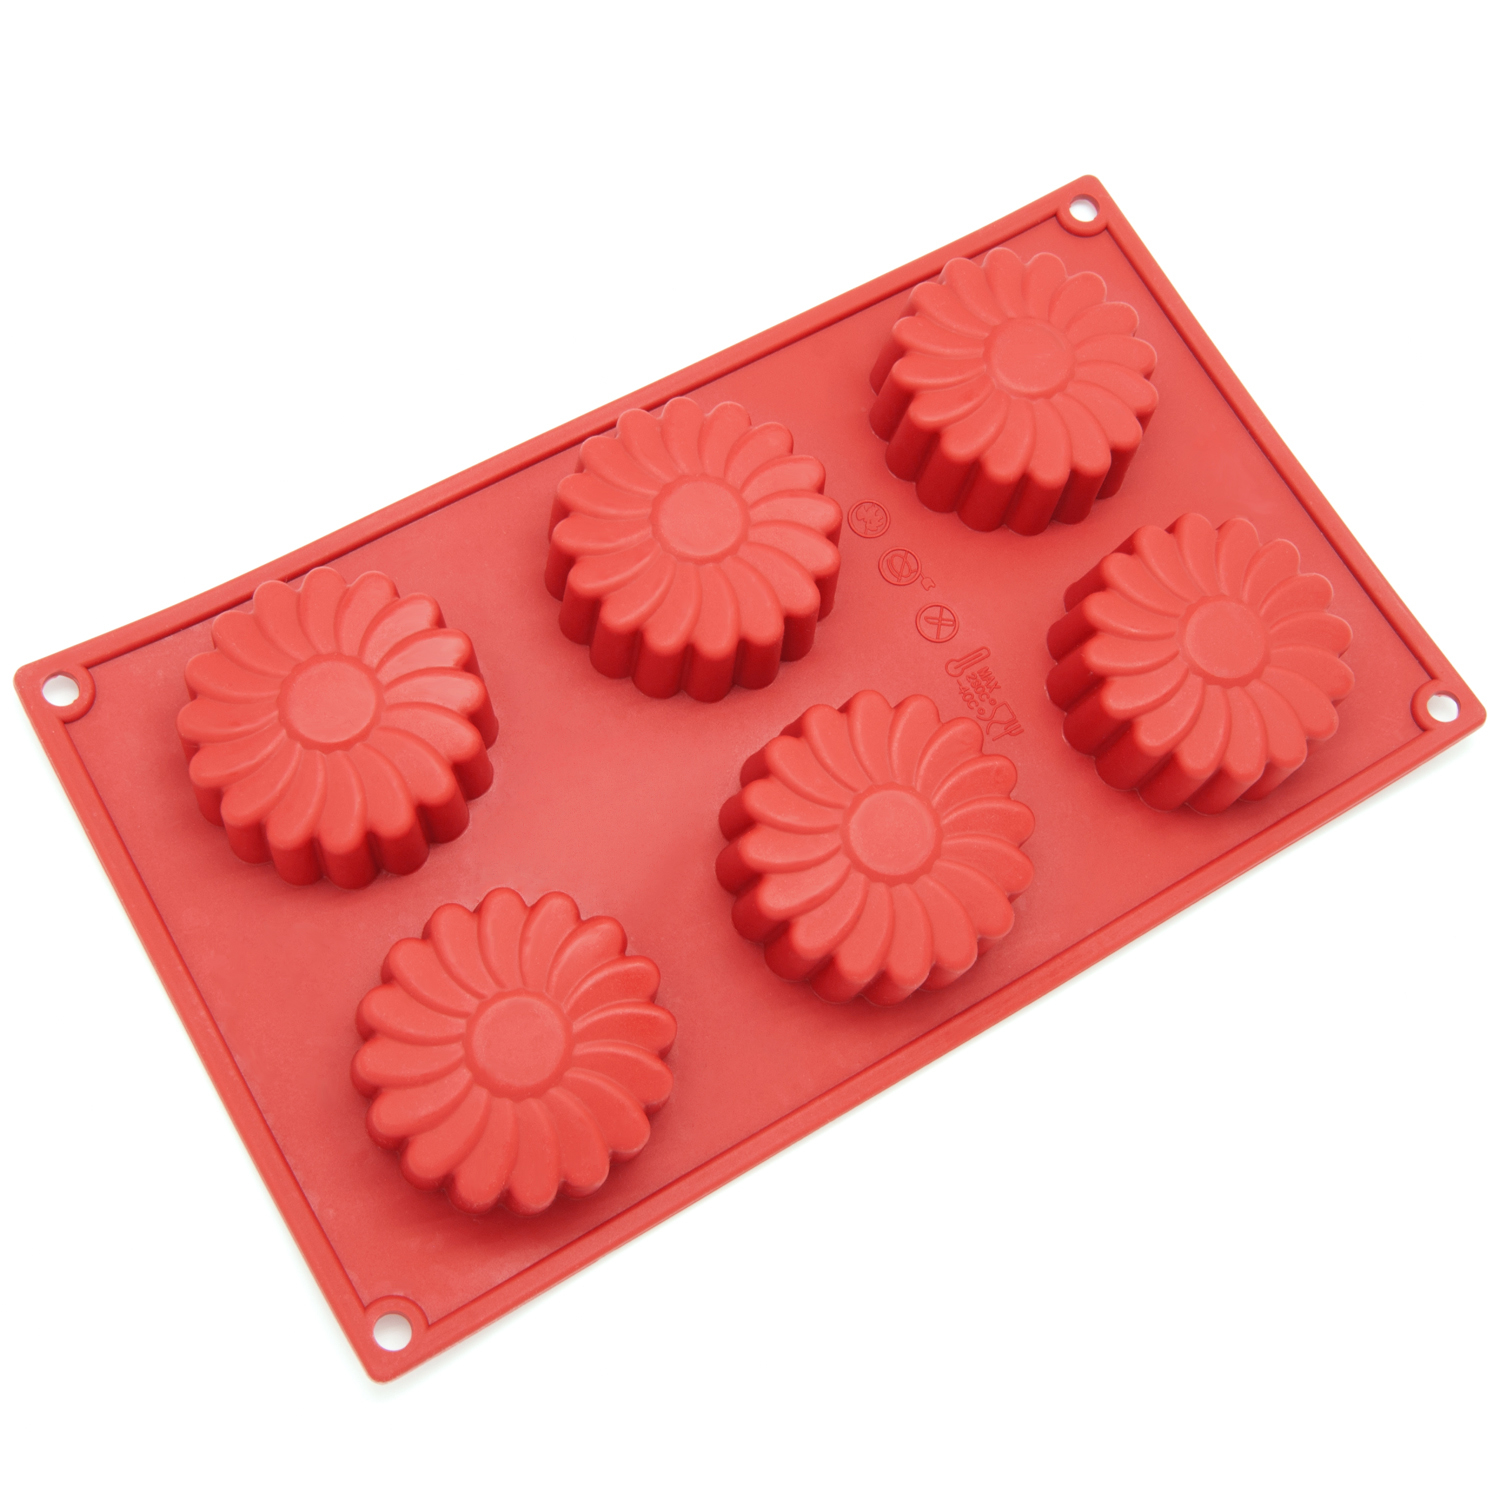 Freshware Silicone Mold, Soap Mold for Cupcake, Muffin, Pudding, Cheesecake, Jello Shot and Soap, Daisy Flower, 6-Cavity